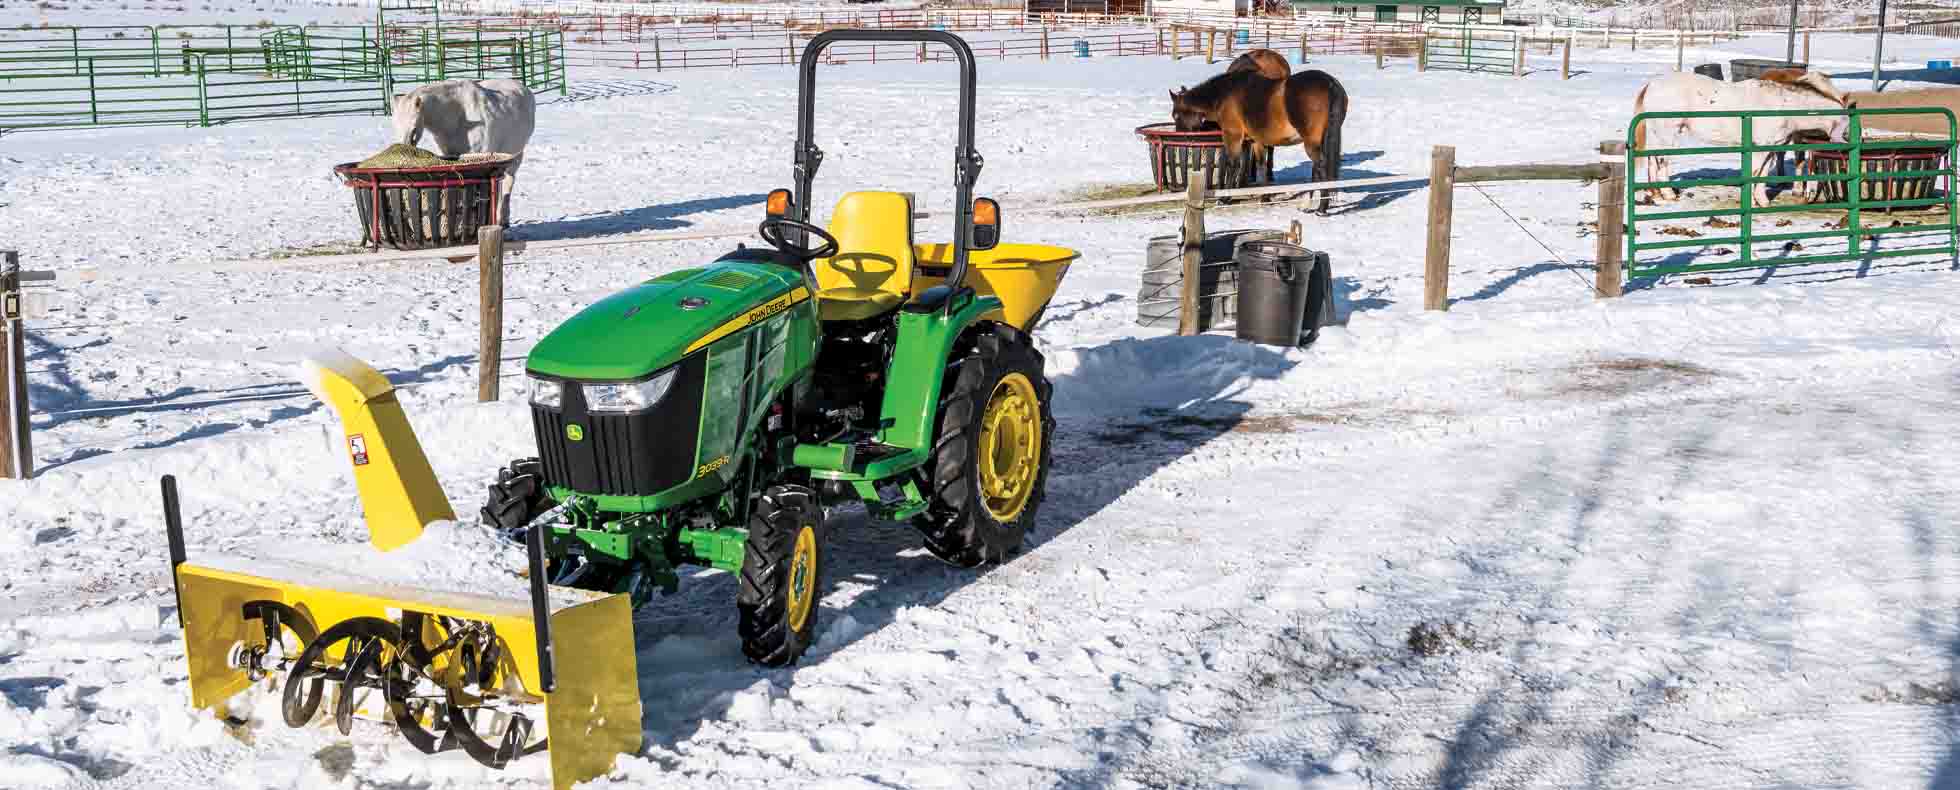 Top 5 Snow Removal Attachments for Compact Tractors